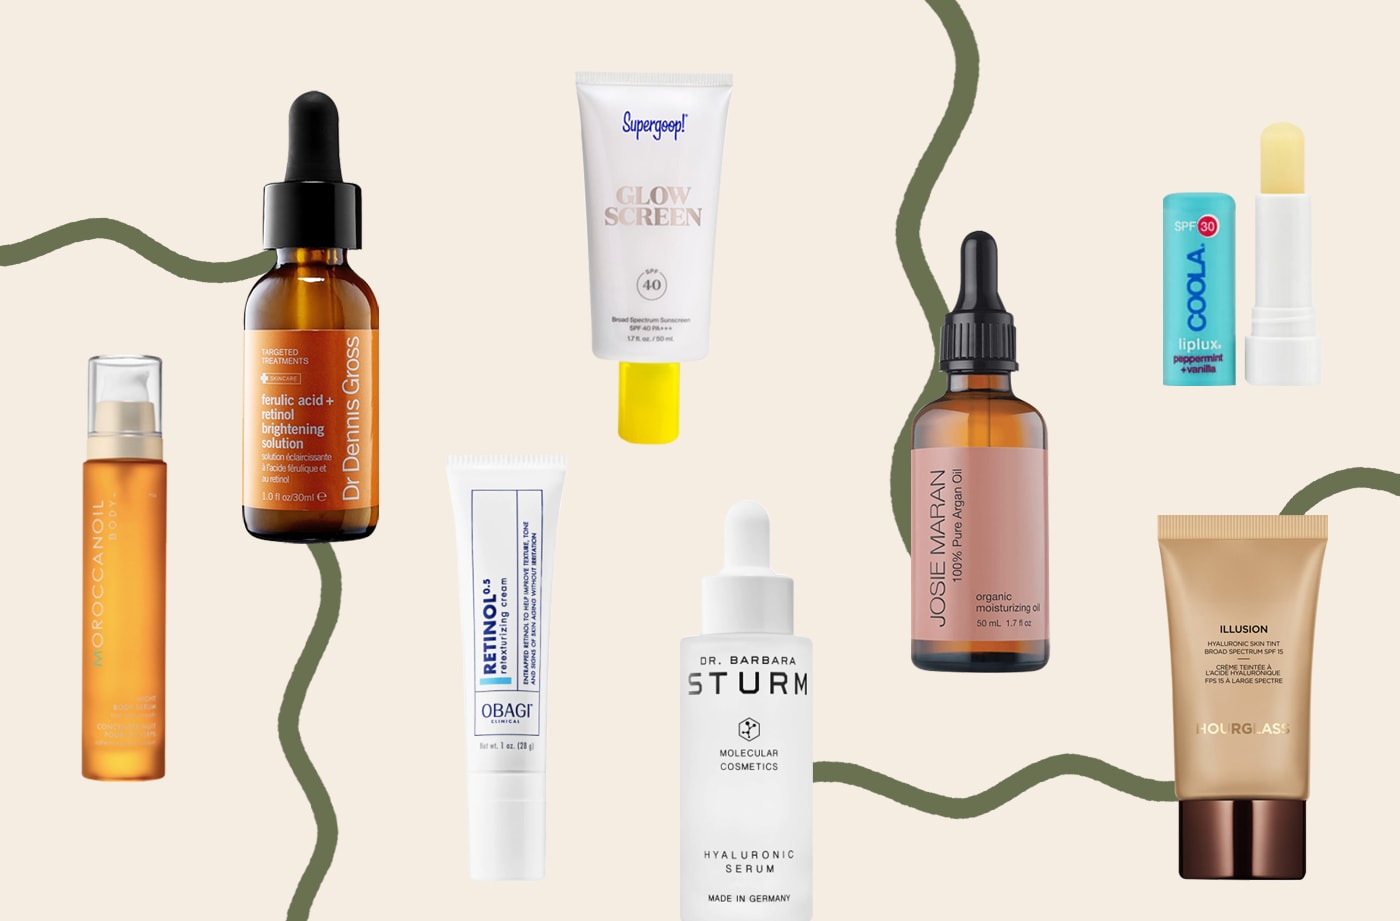 The products on sale at Sephora to snag whether you're in your 20s, 30s, 40s, 50s, and beyond